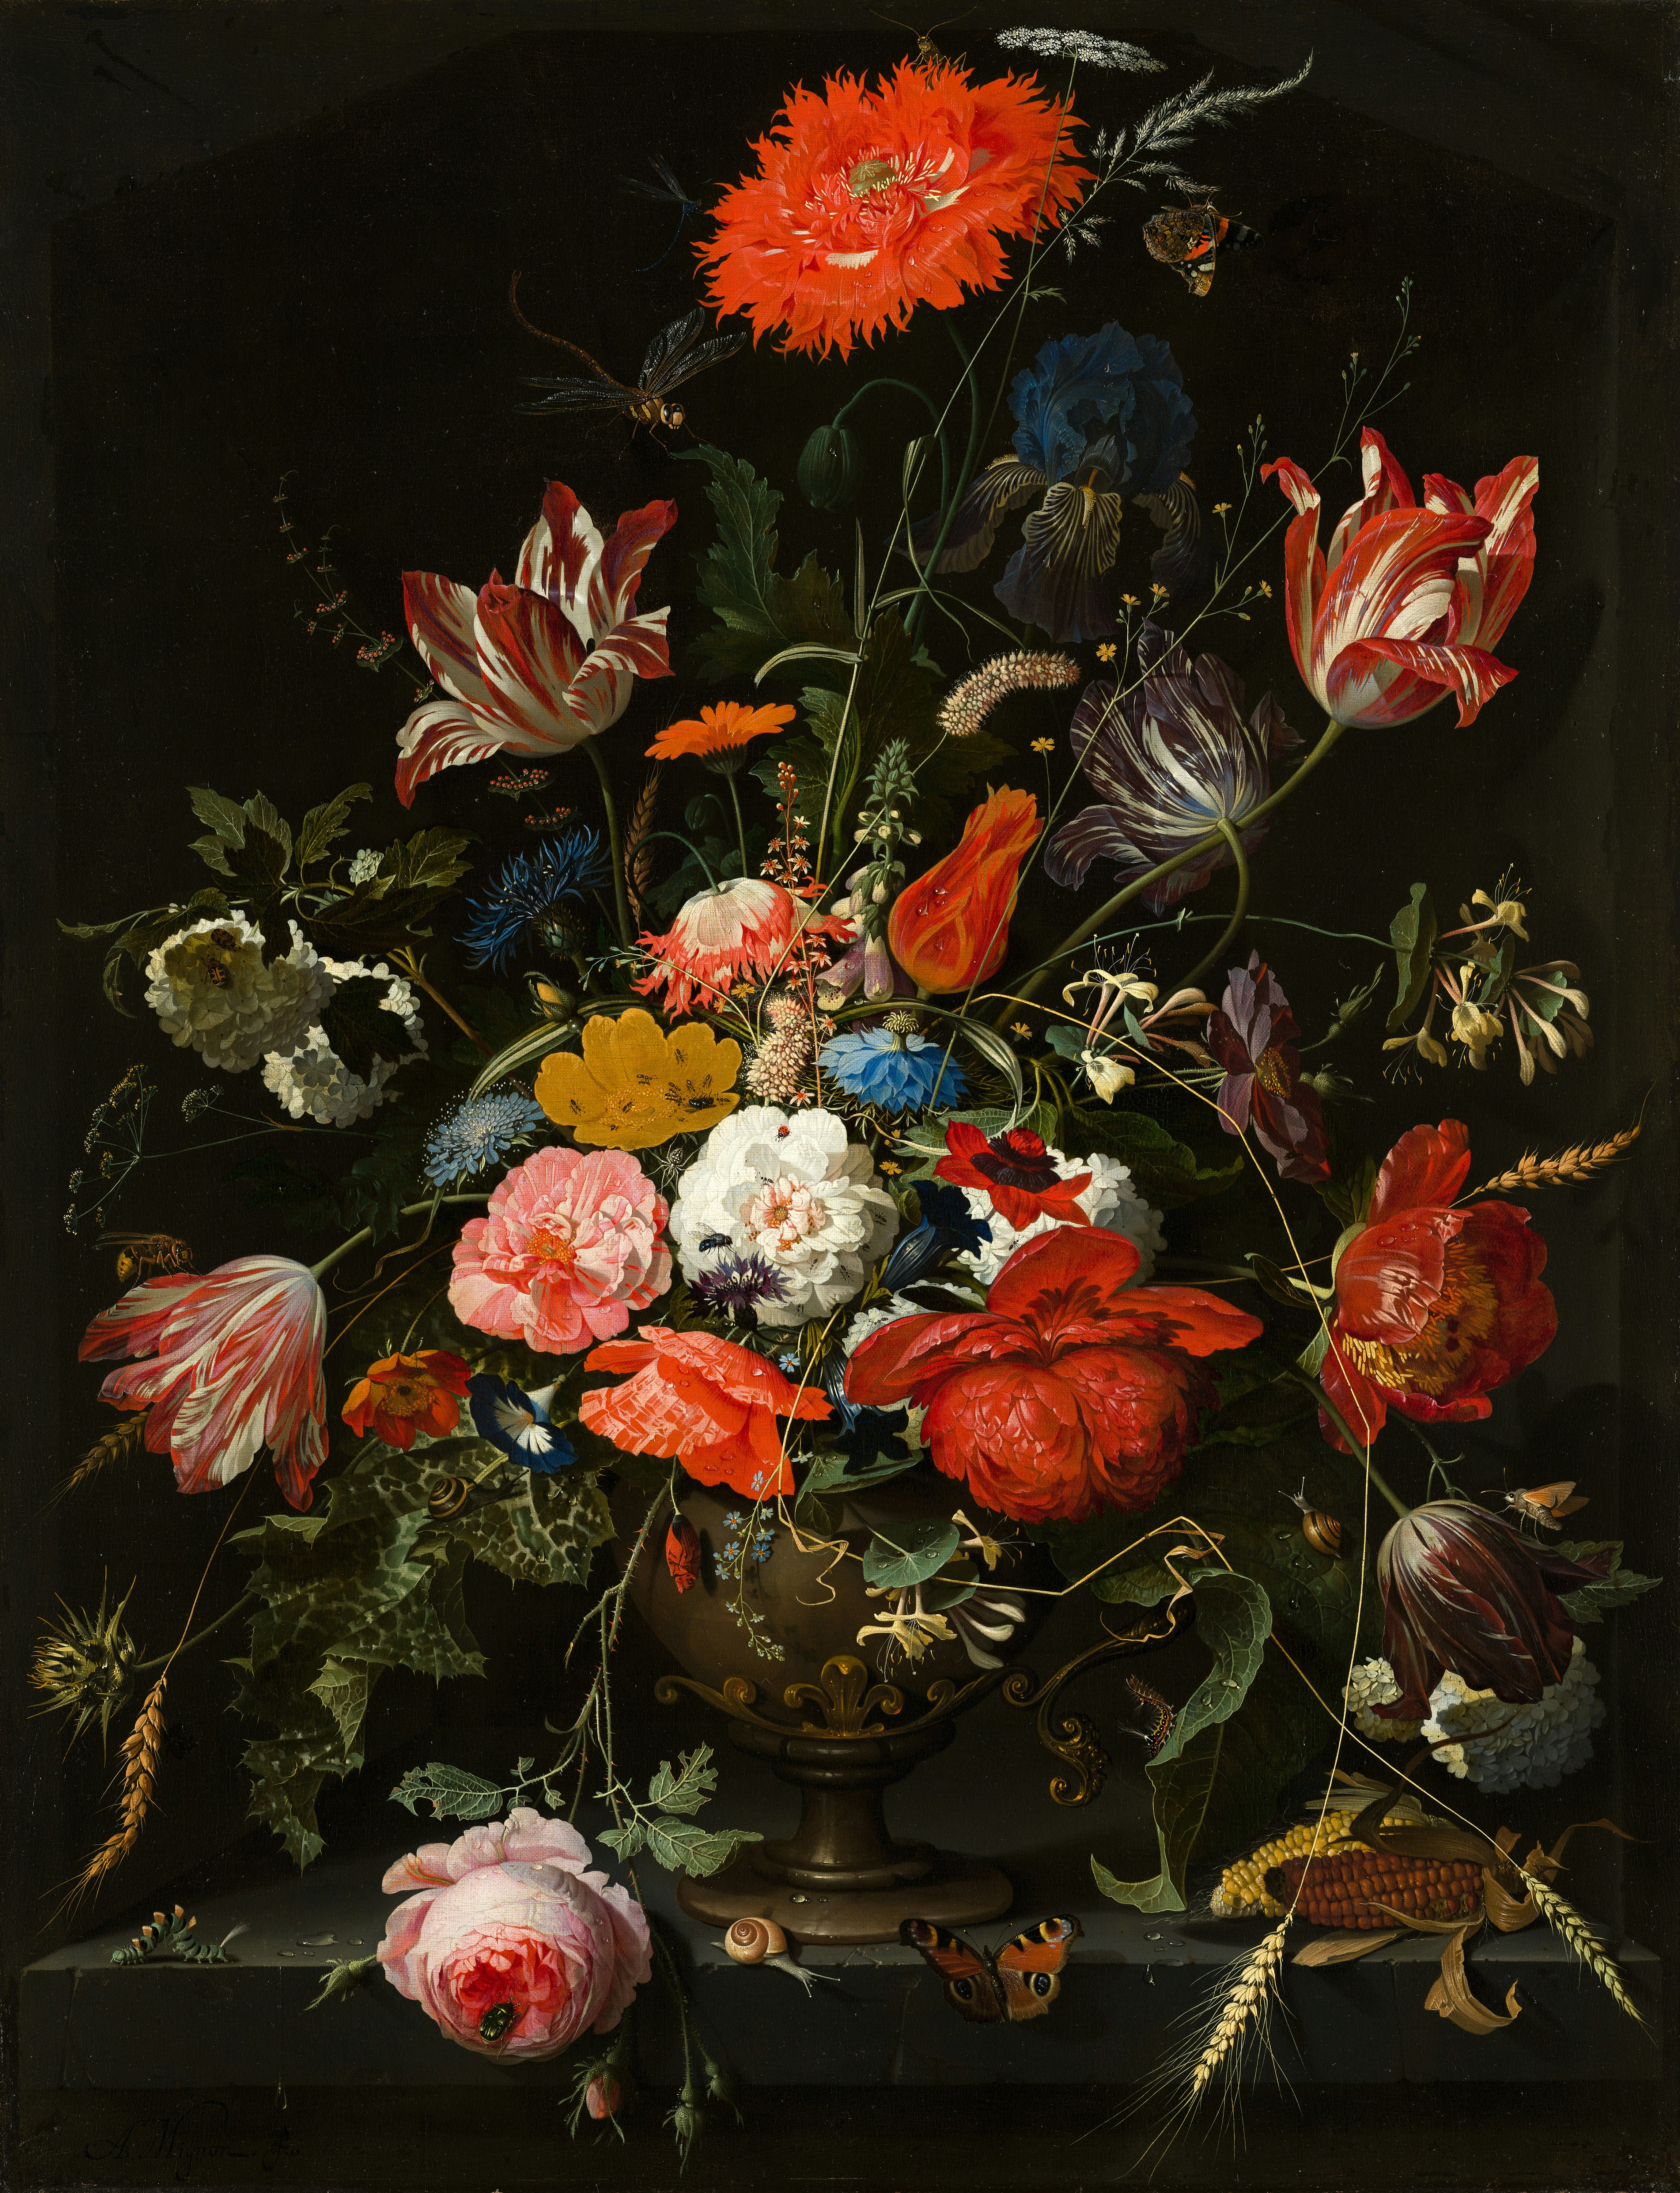 Flowers in a Metal Vase.
Creator: Abraham Mignon.
Date:1670.
Institution: Mauritshuis.
Provider: Digitale Collectie.
Providing Country: Netherlands.
PD for Public Domain Mark 